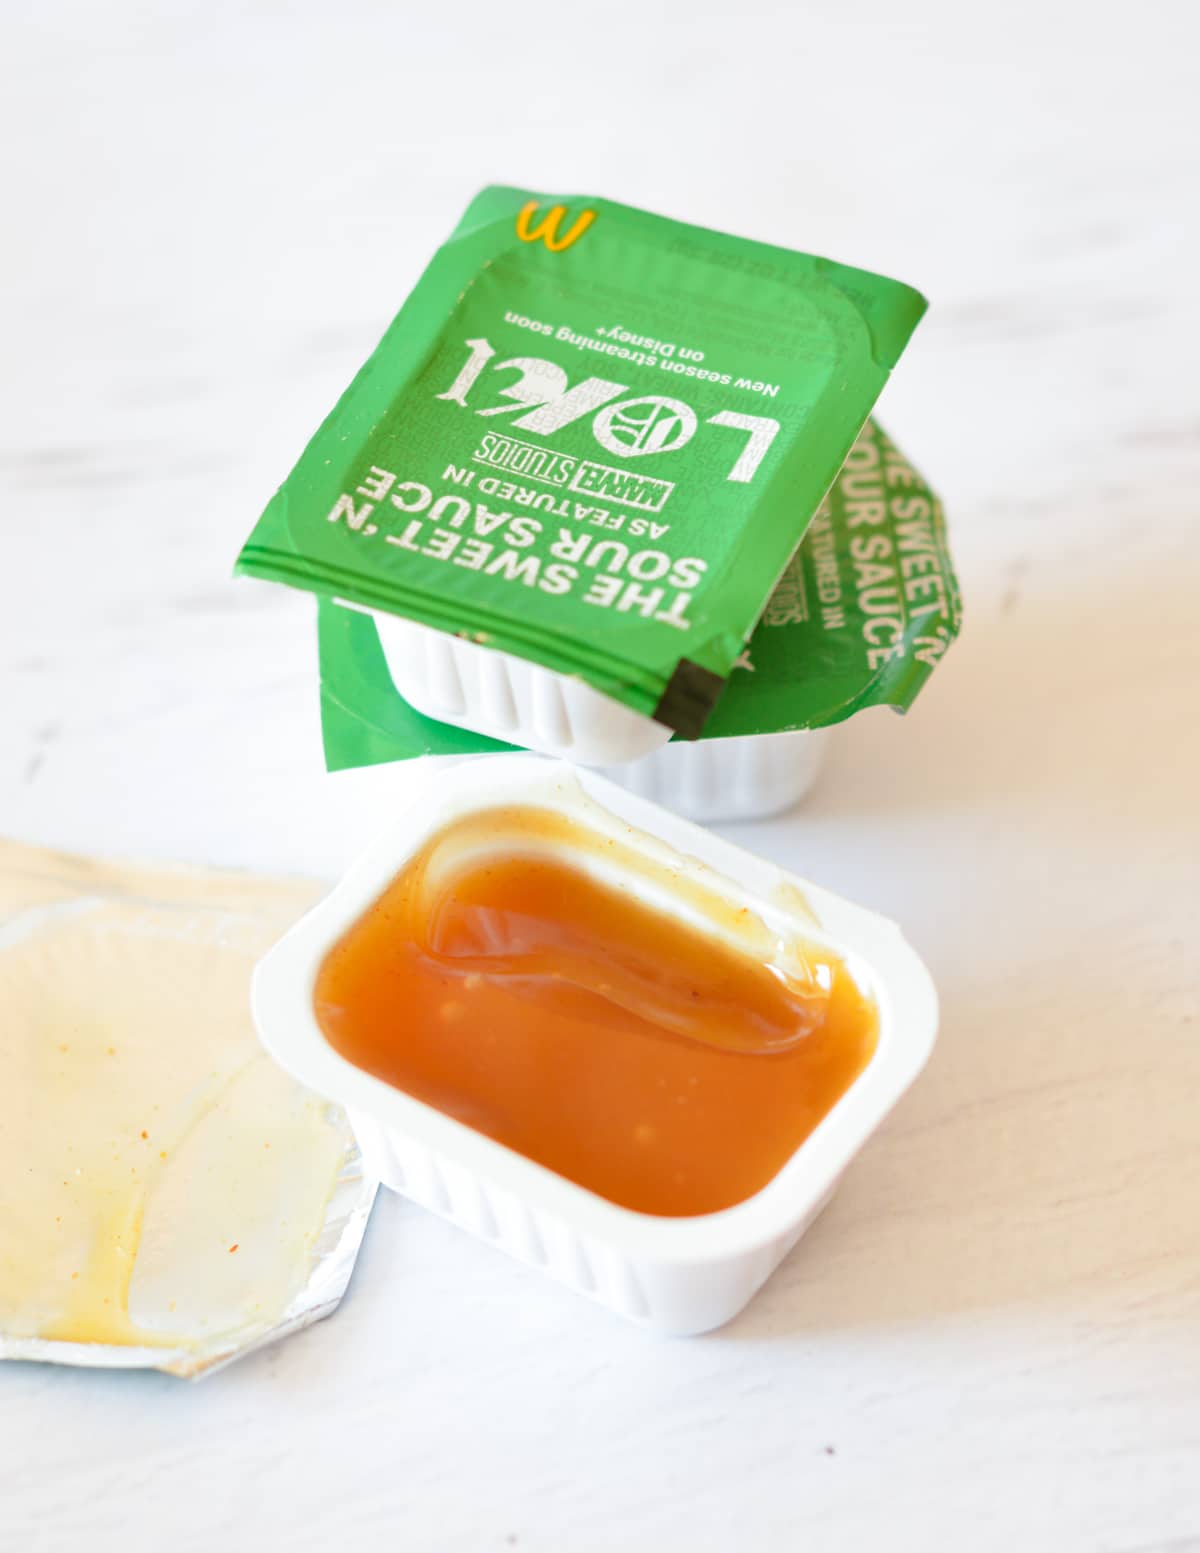 mcdonald's sweet and sour sauce packets.